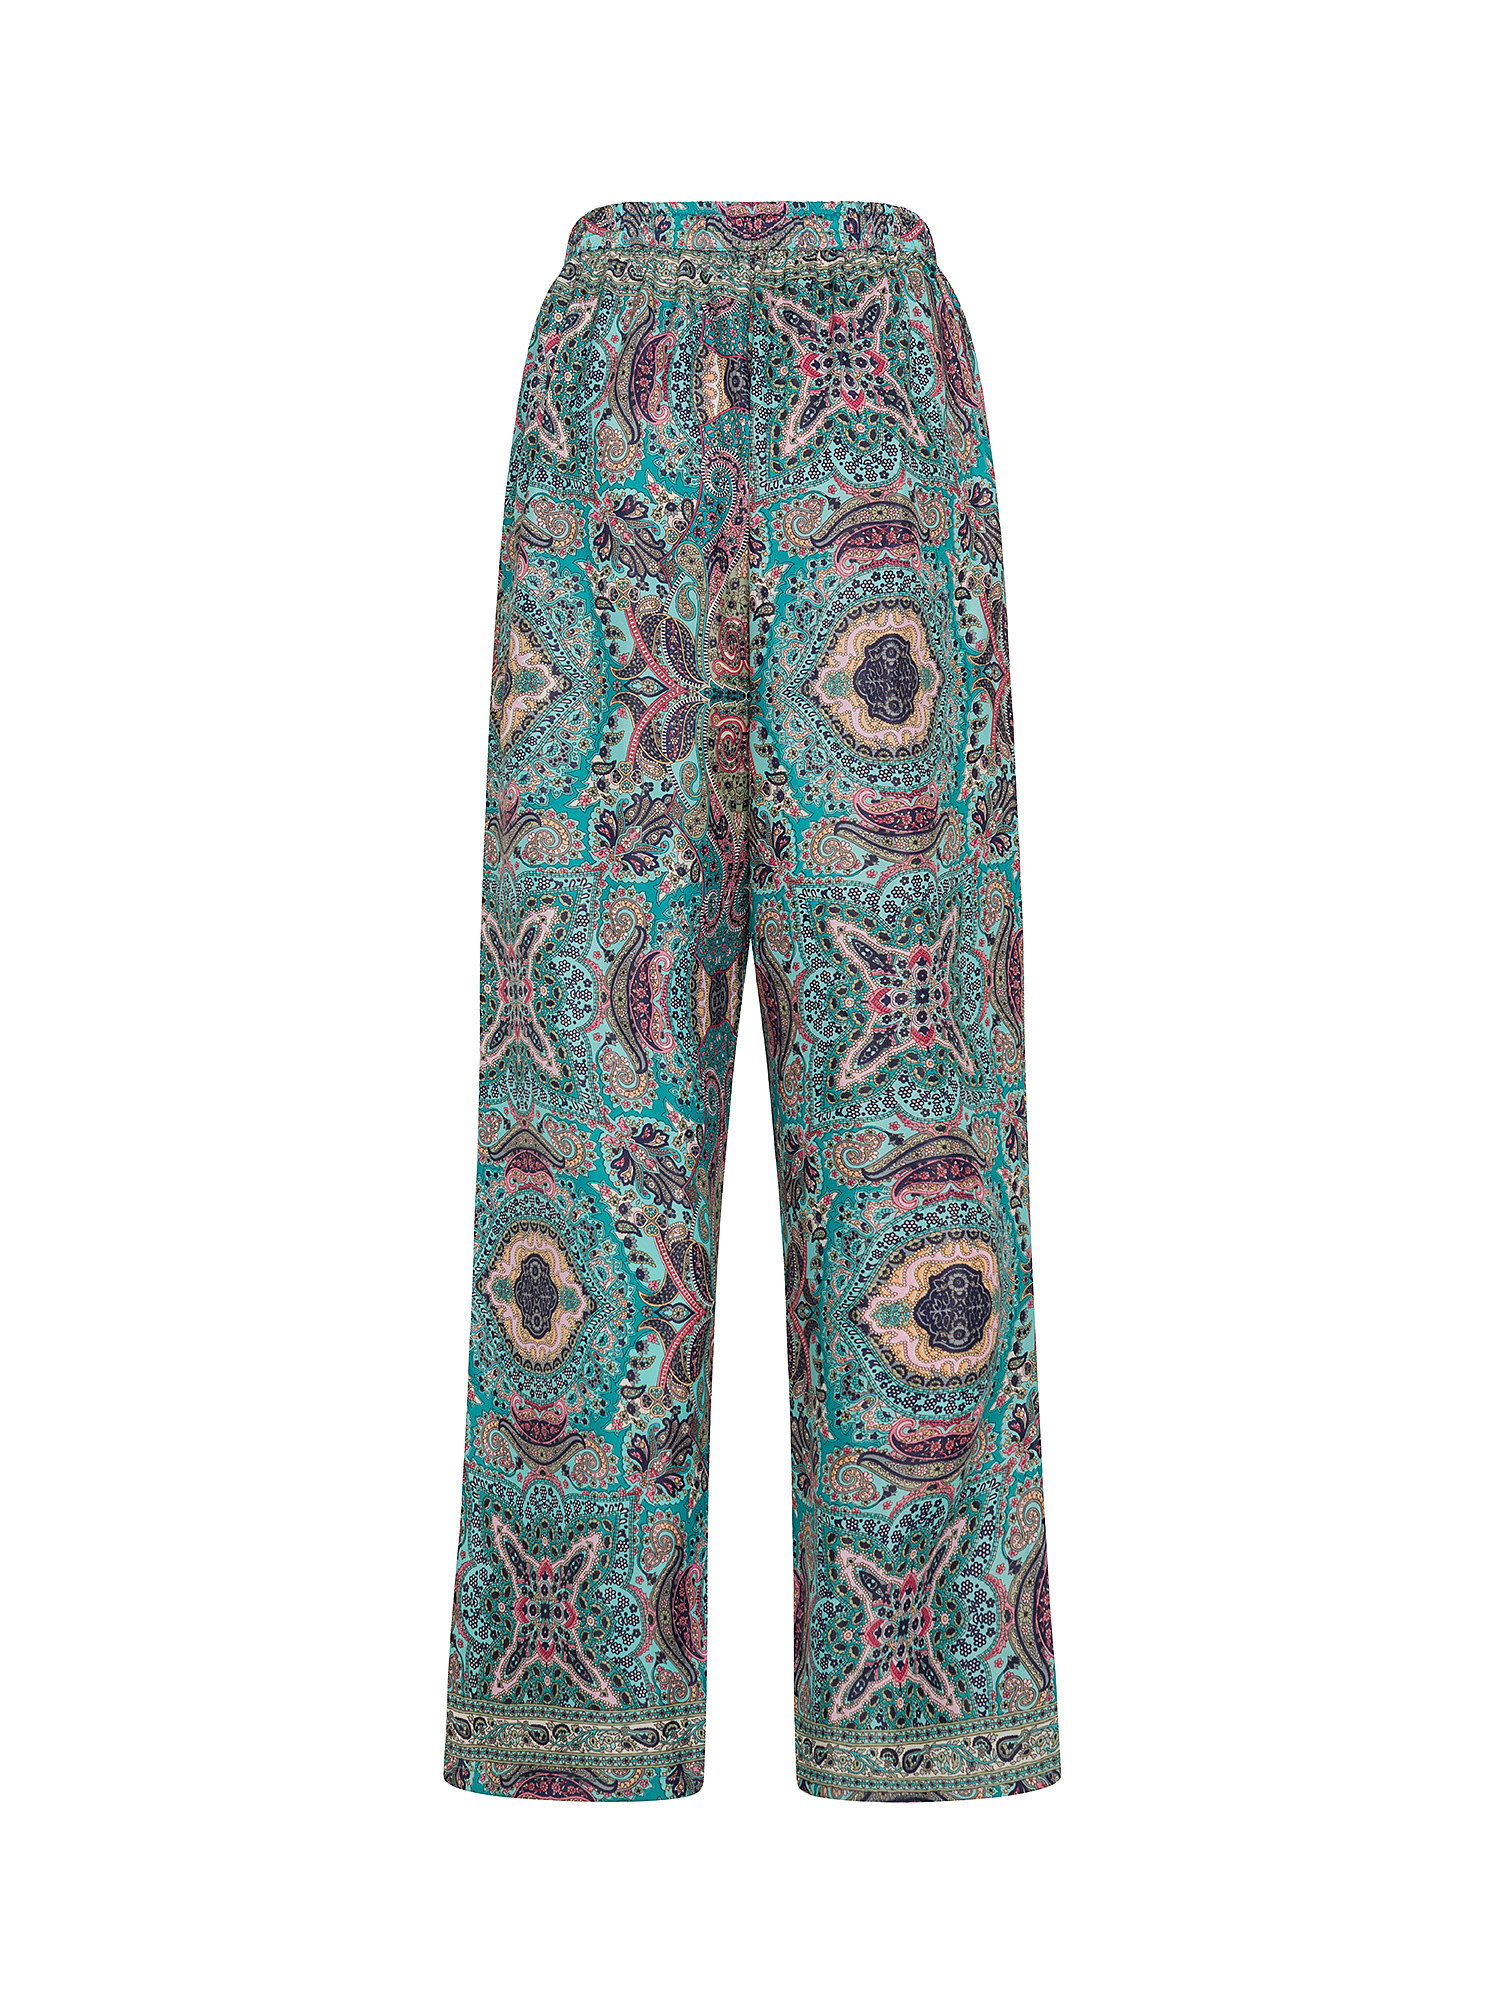 Koan - Soft trousers with print, Green, large image number 1